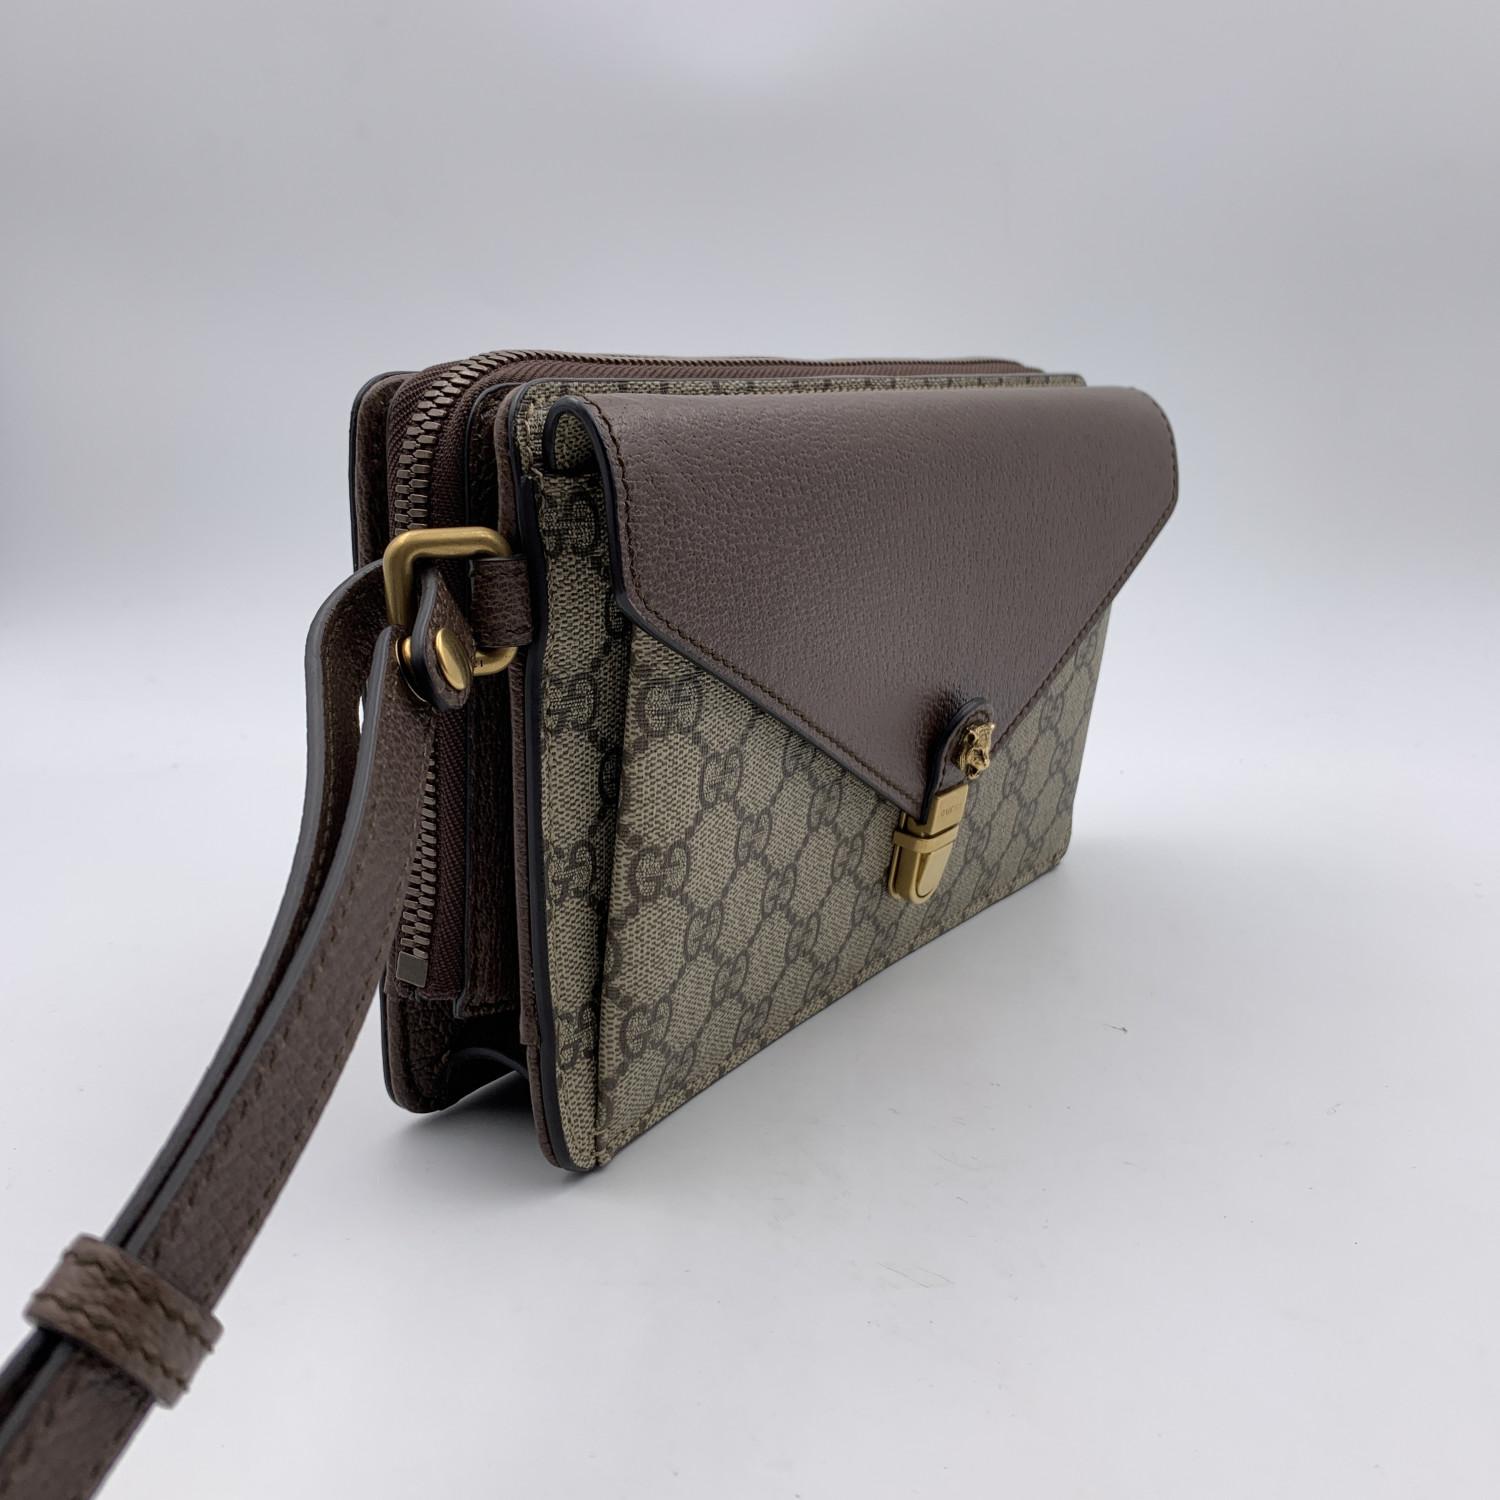 Gucci monogram canvas wrist bag. The bag is in GG supreme canvas with brown genuine leather trim and front flap. Gold metal tiger head on the front. 1 front flap pocket. Upper zipper closure. Beige microfiber lining. 2 interchangeable wrist straps